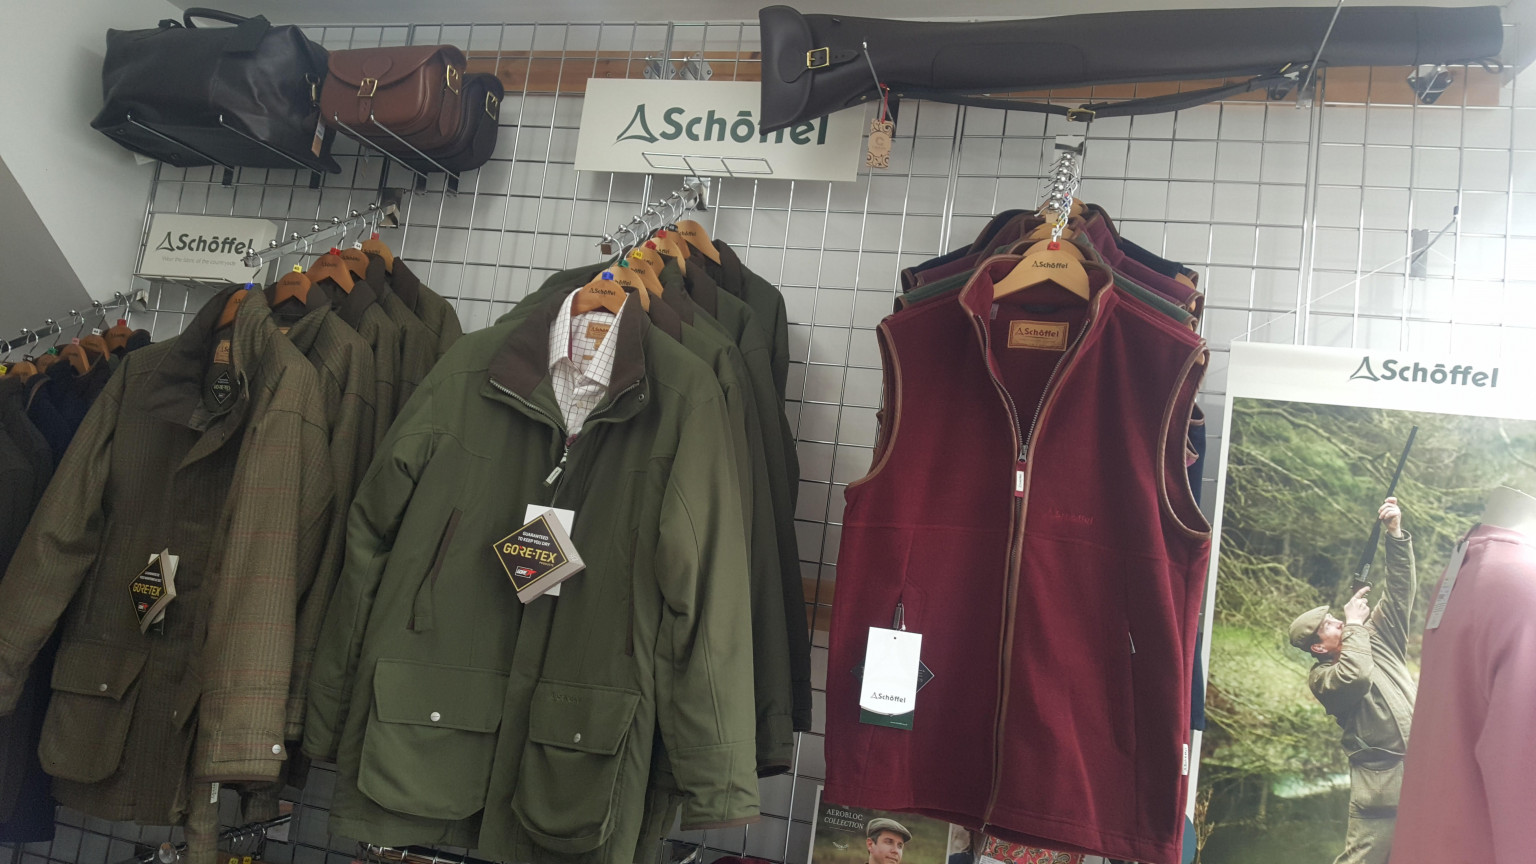 Schoffel country clothing in UK shop